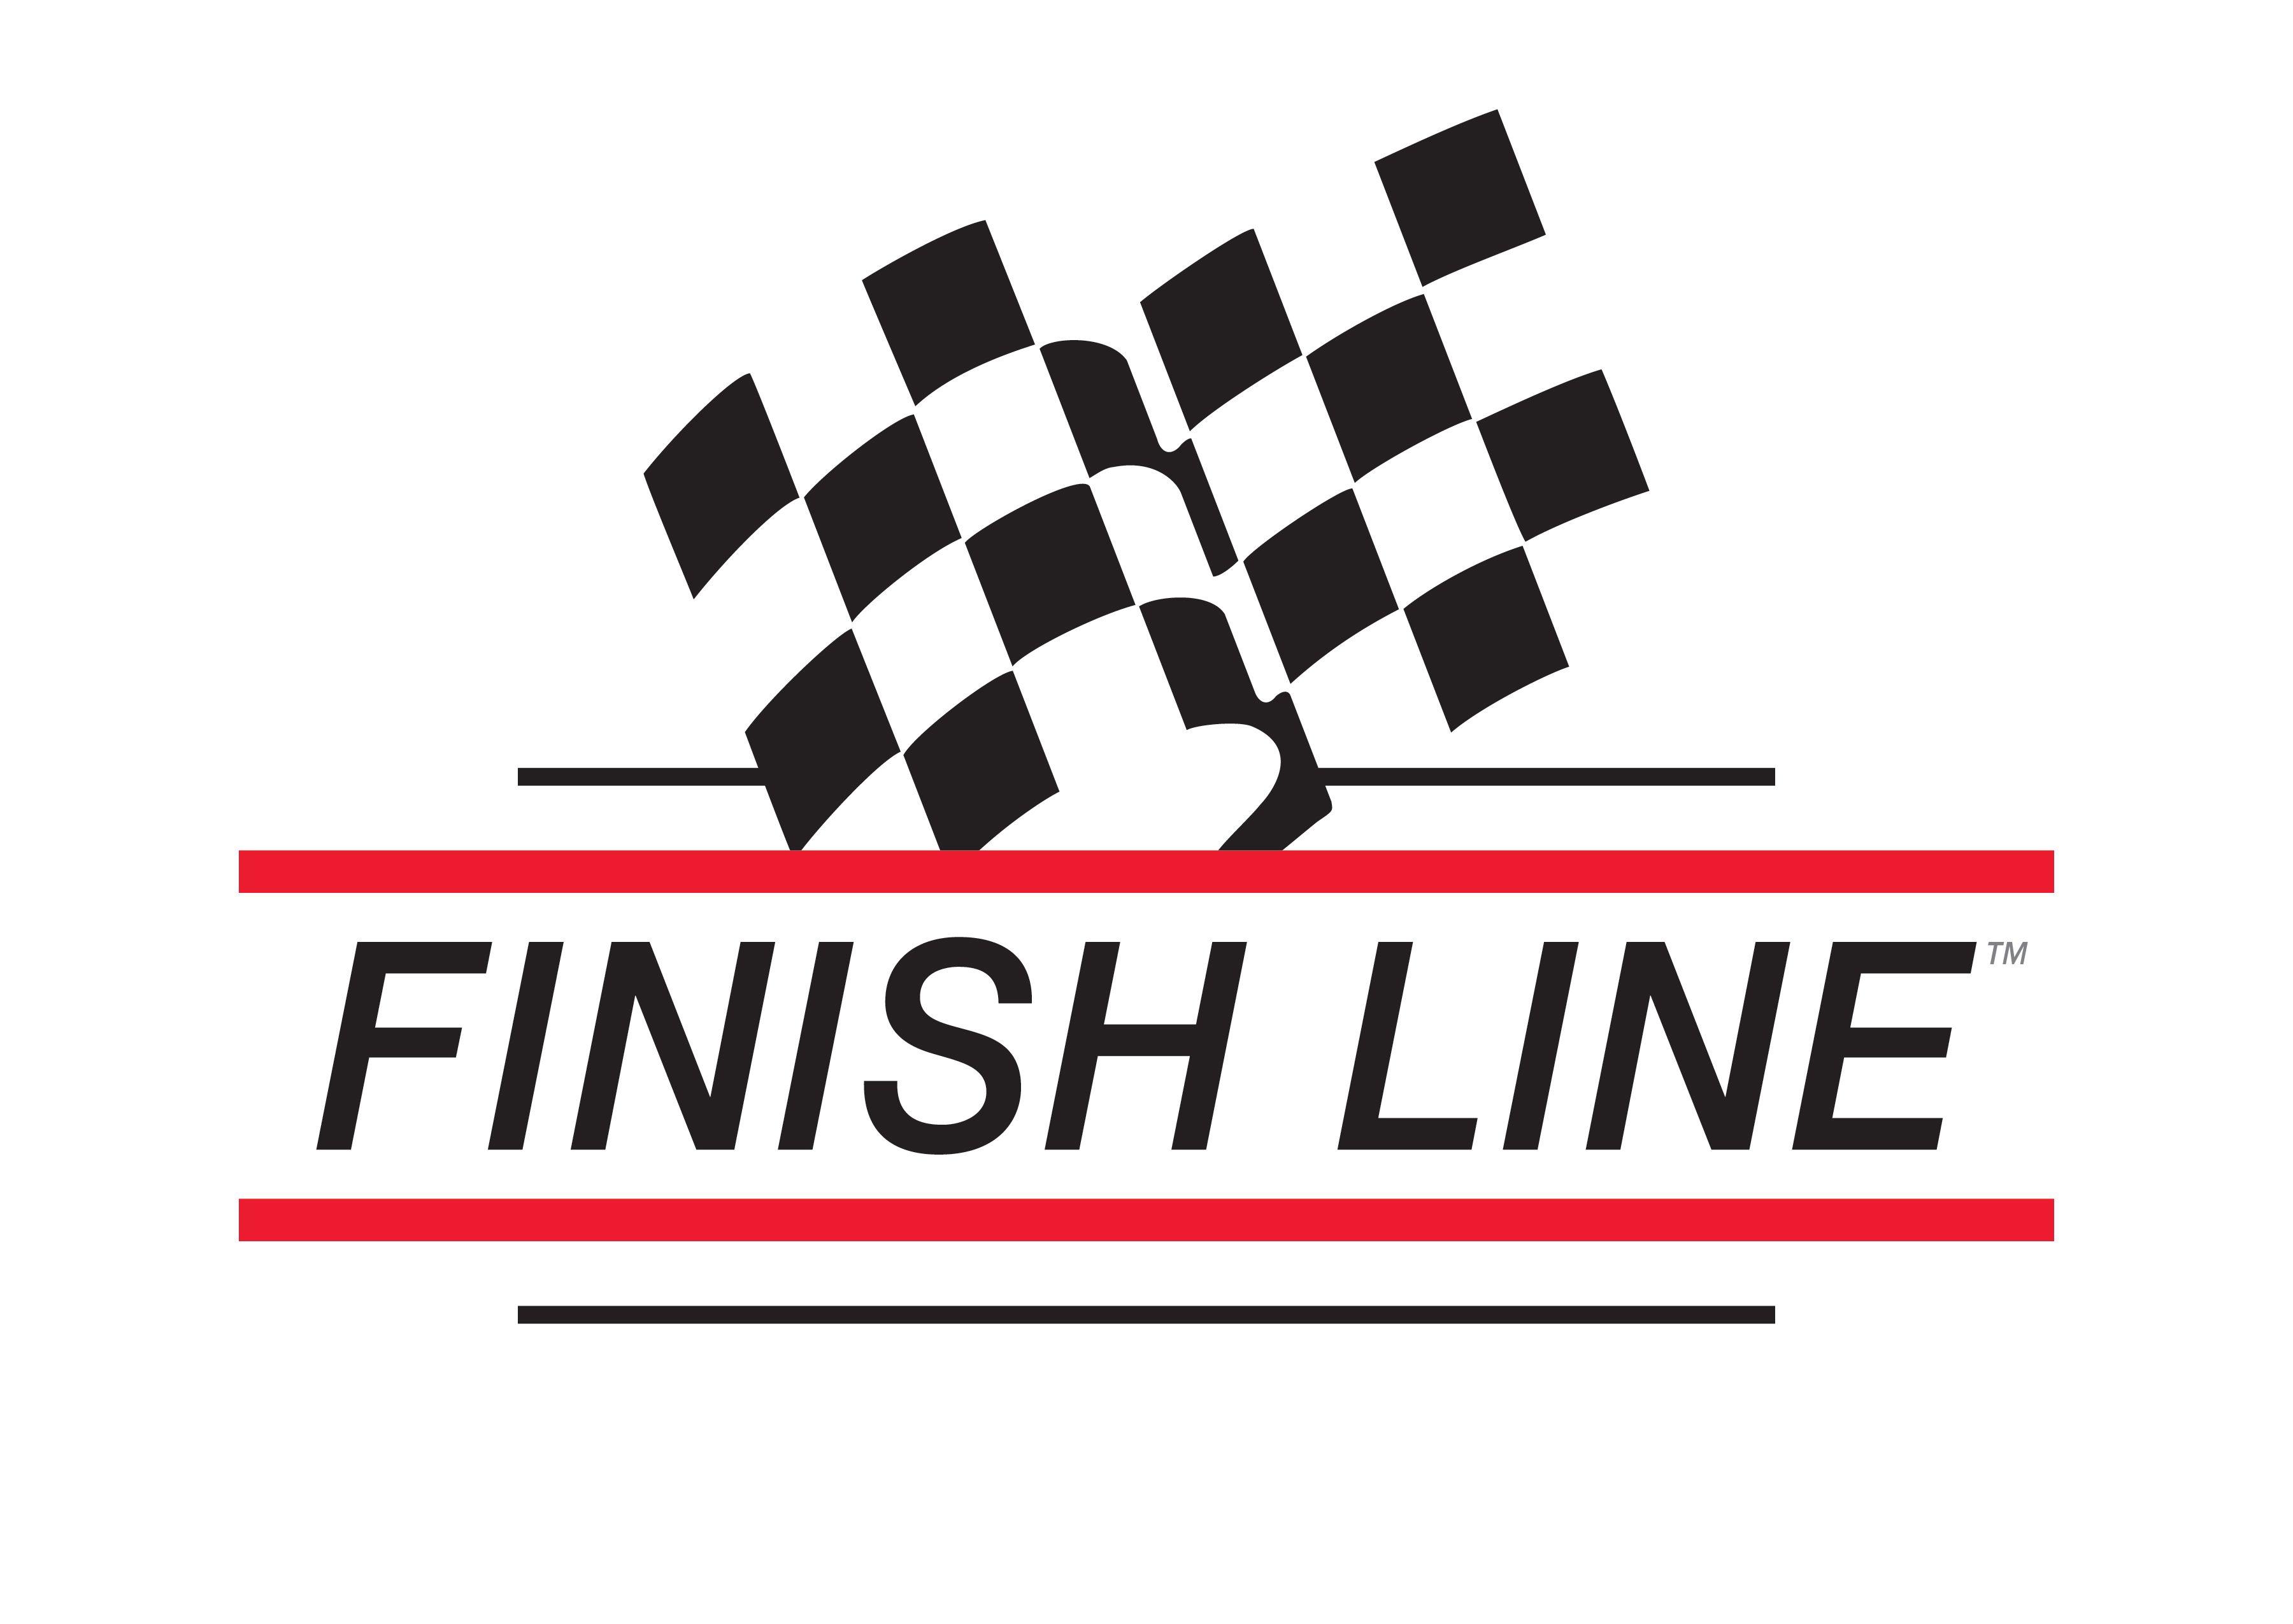 Finishline Logo - Finish Line - Bicycle Lubricants and Care Products - Additional Items